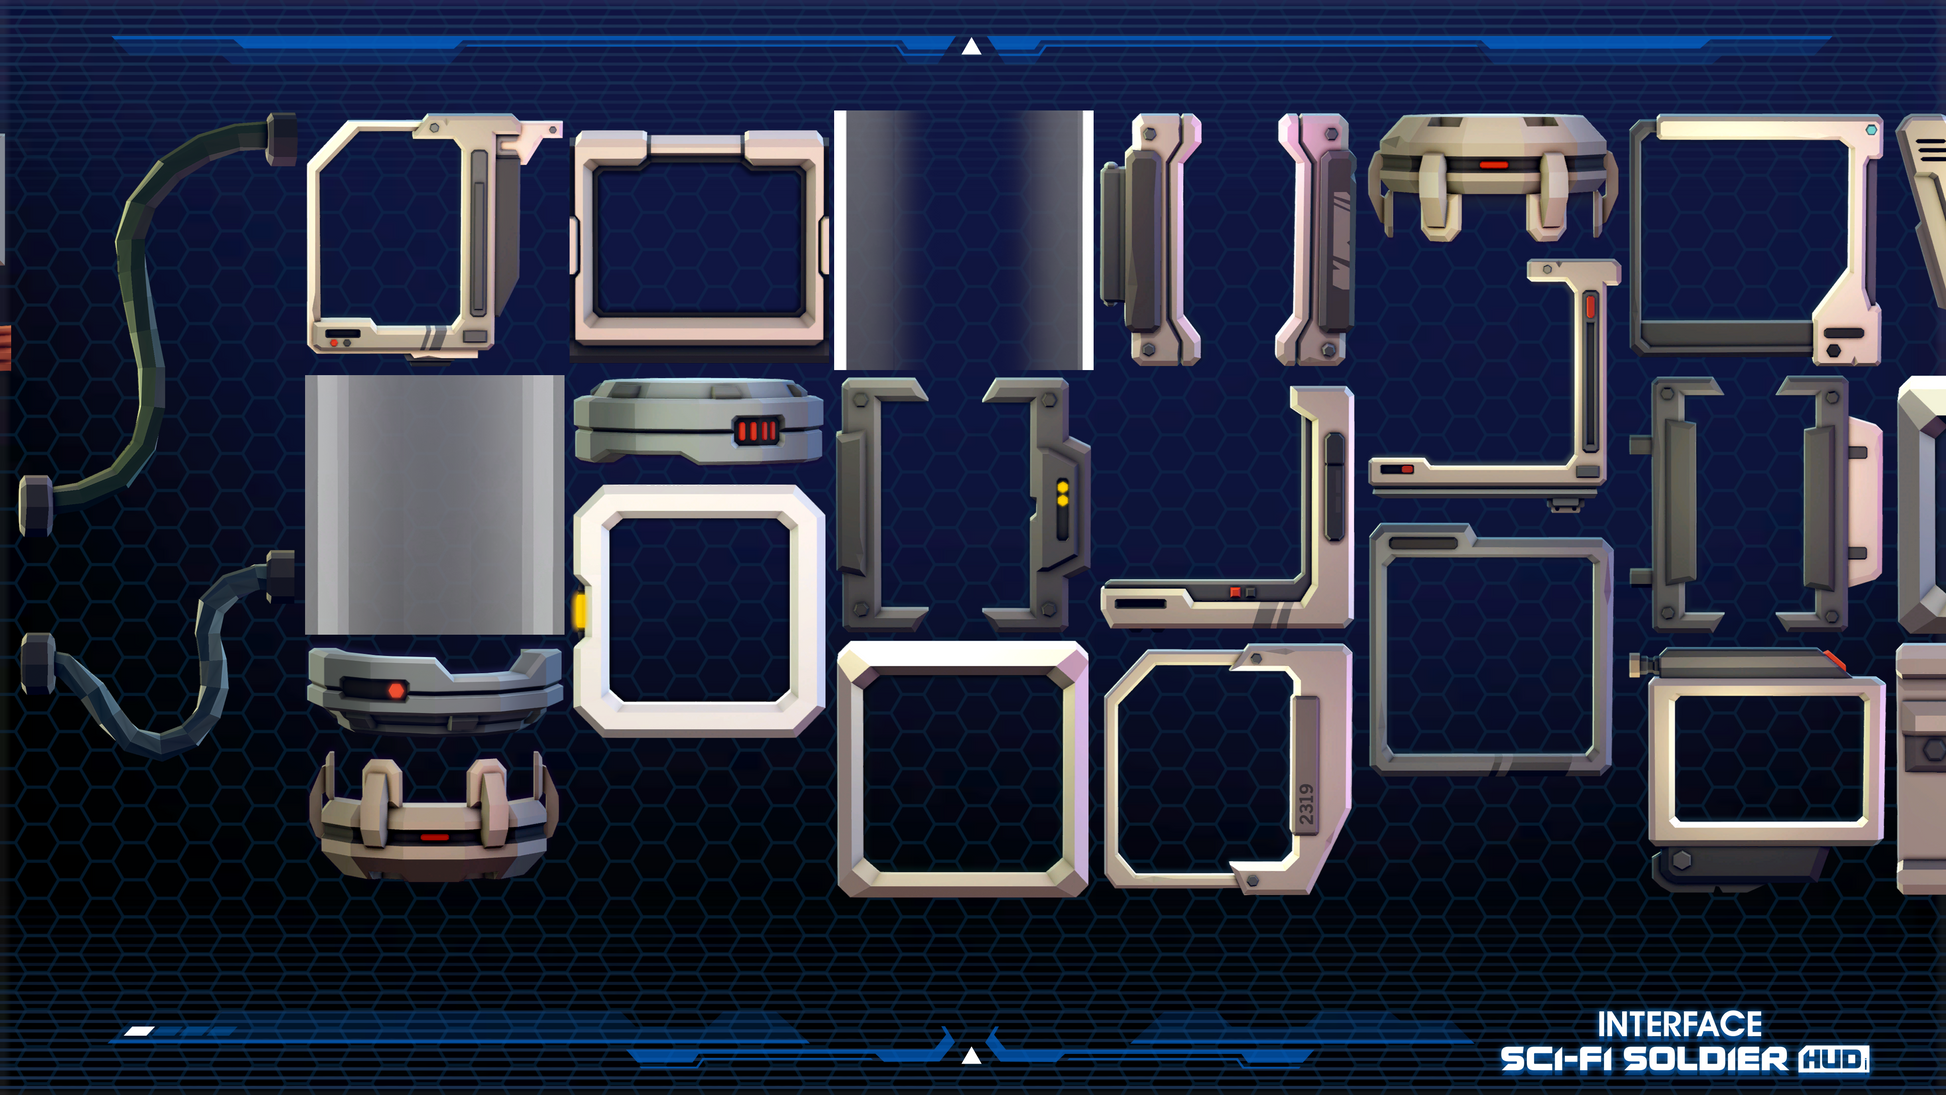 Space component sprites from the INTERFACE Sci-Fi Soldier HUD asset pack